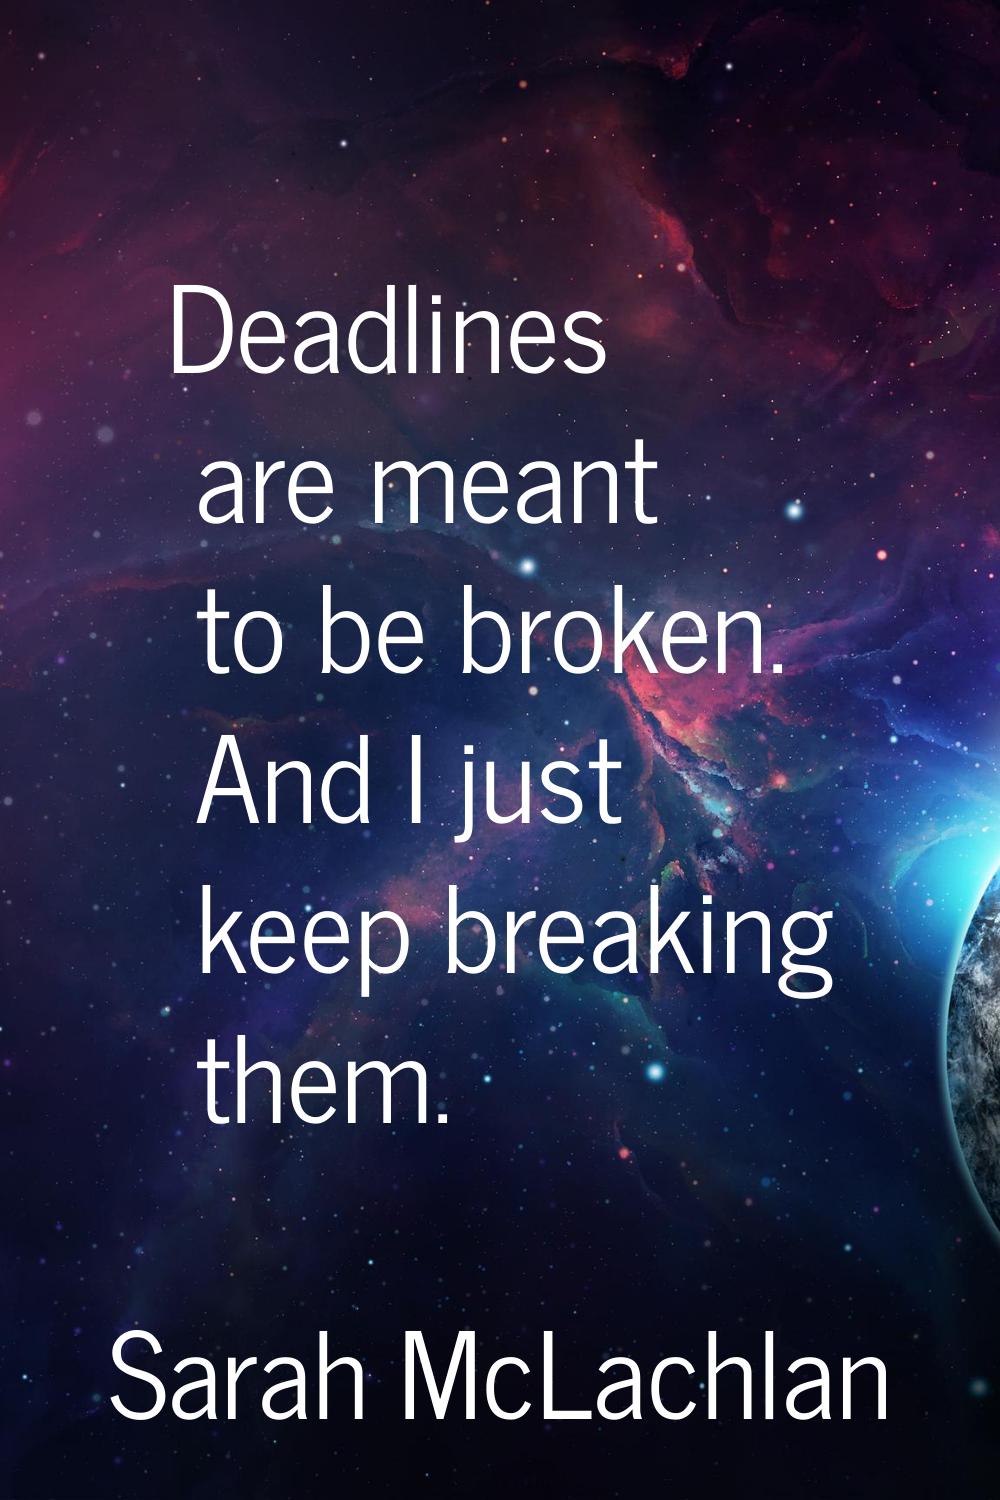 Deadlines are meant to be broken. And I just keep breaking them.